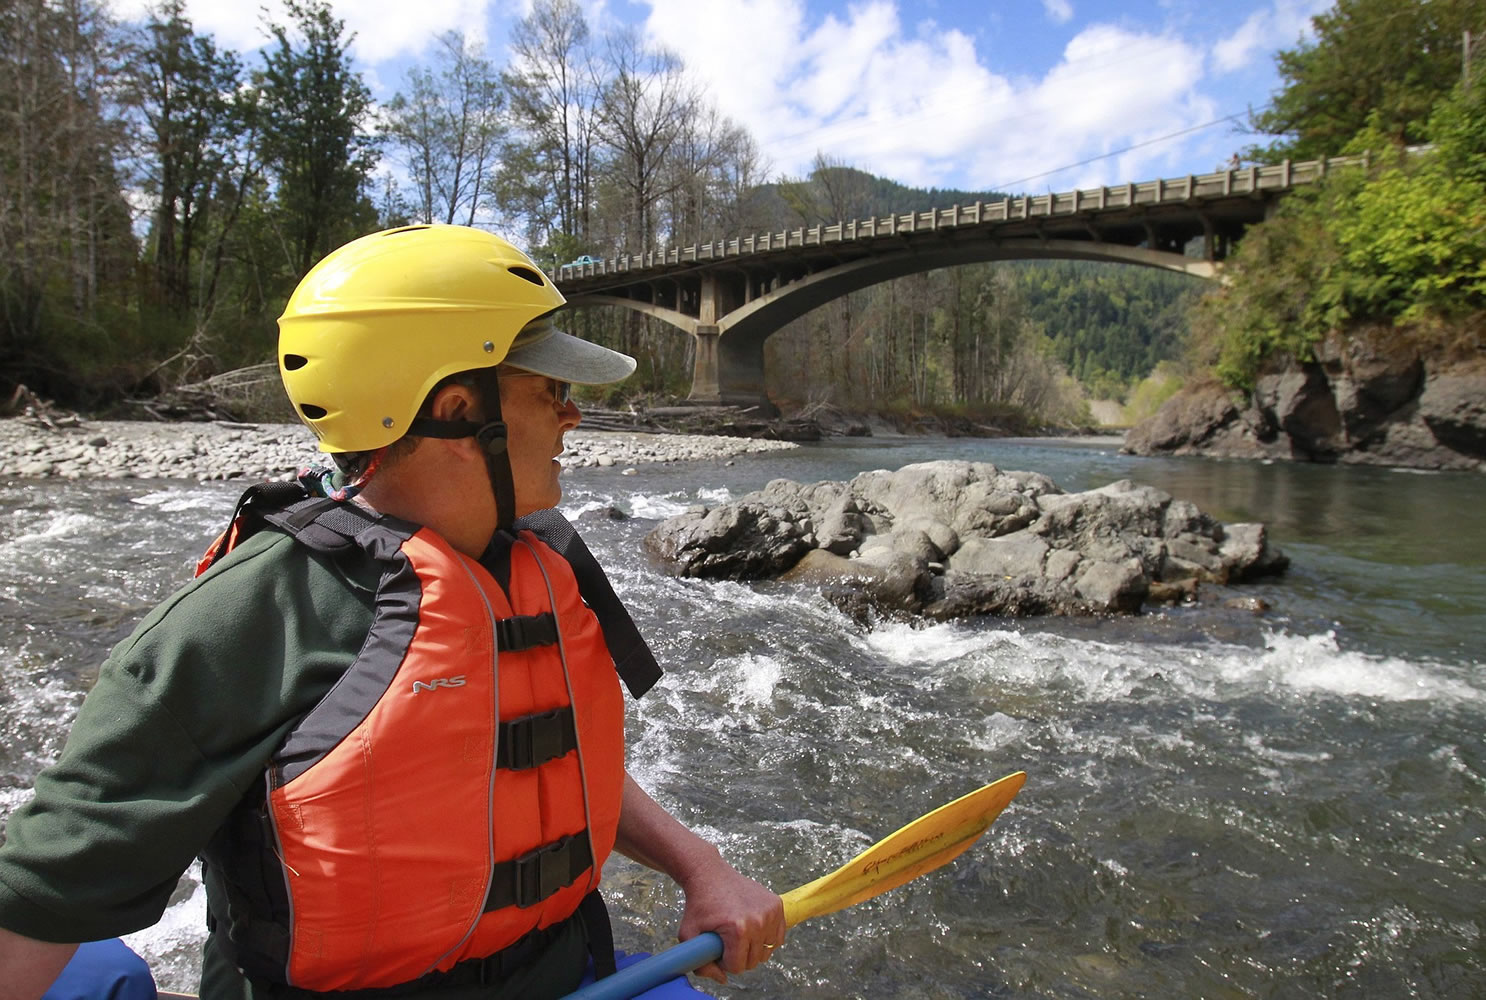 Rob Smith approaches the Highway 101 bridge Aug. 19 on the Elwha River in Olympic National Park, in an area that was underwater before the Elwha Dam was removed in 2012 near Port Angeles.